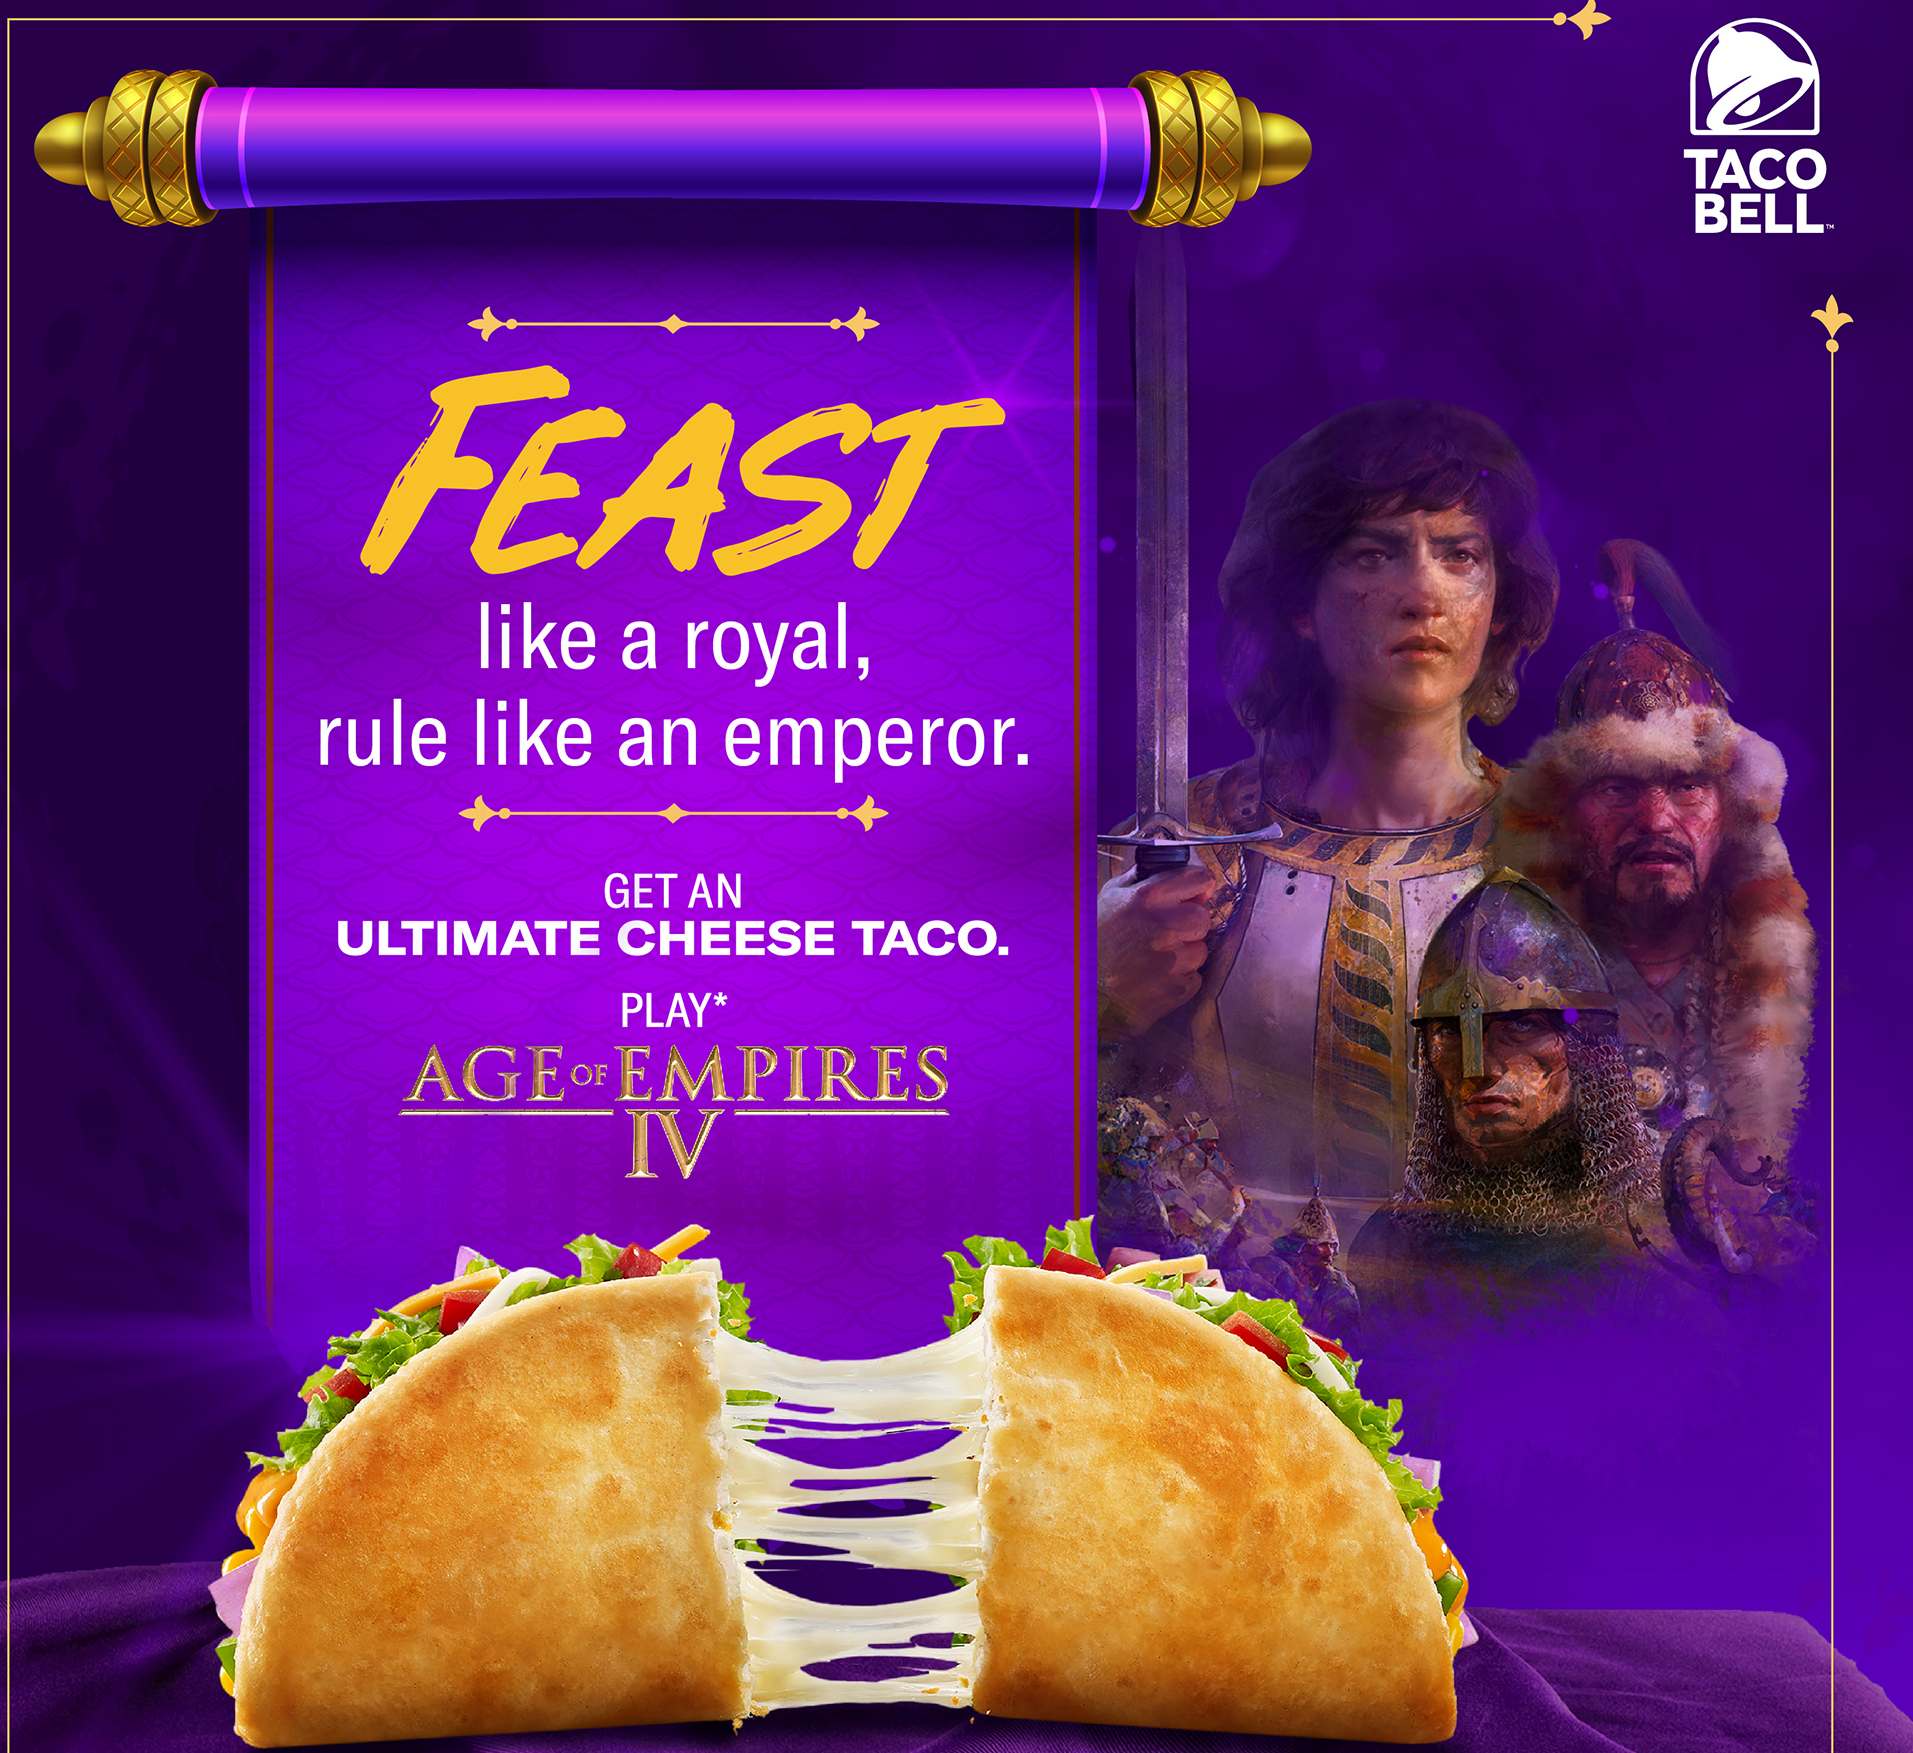 TACO BELL TEAMS UP WITH MICROSOFT TO ANNOUNCE AN EXCITING GIVEAWAY OF AGE OF EMPIRE IV PC GAME COPIES